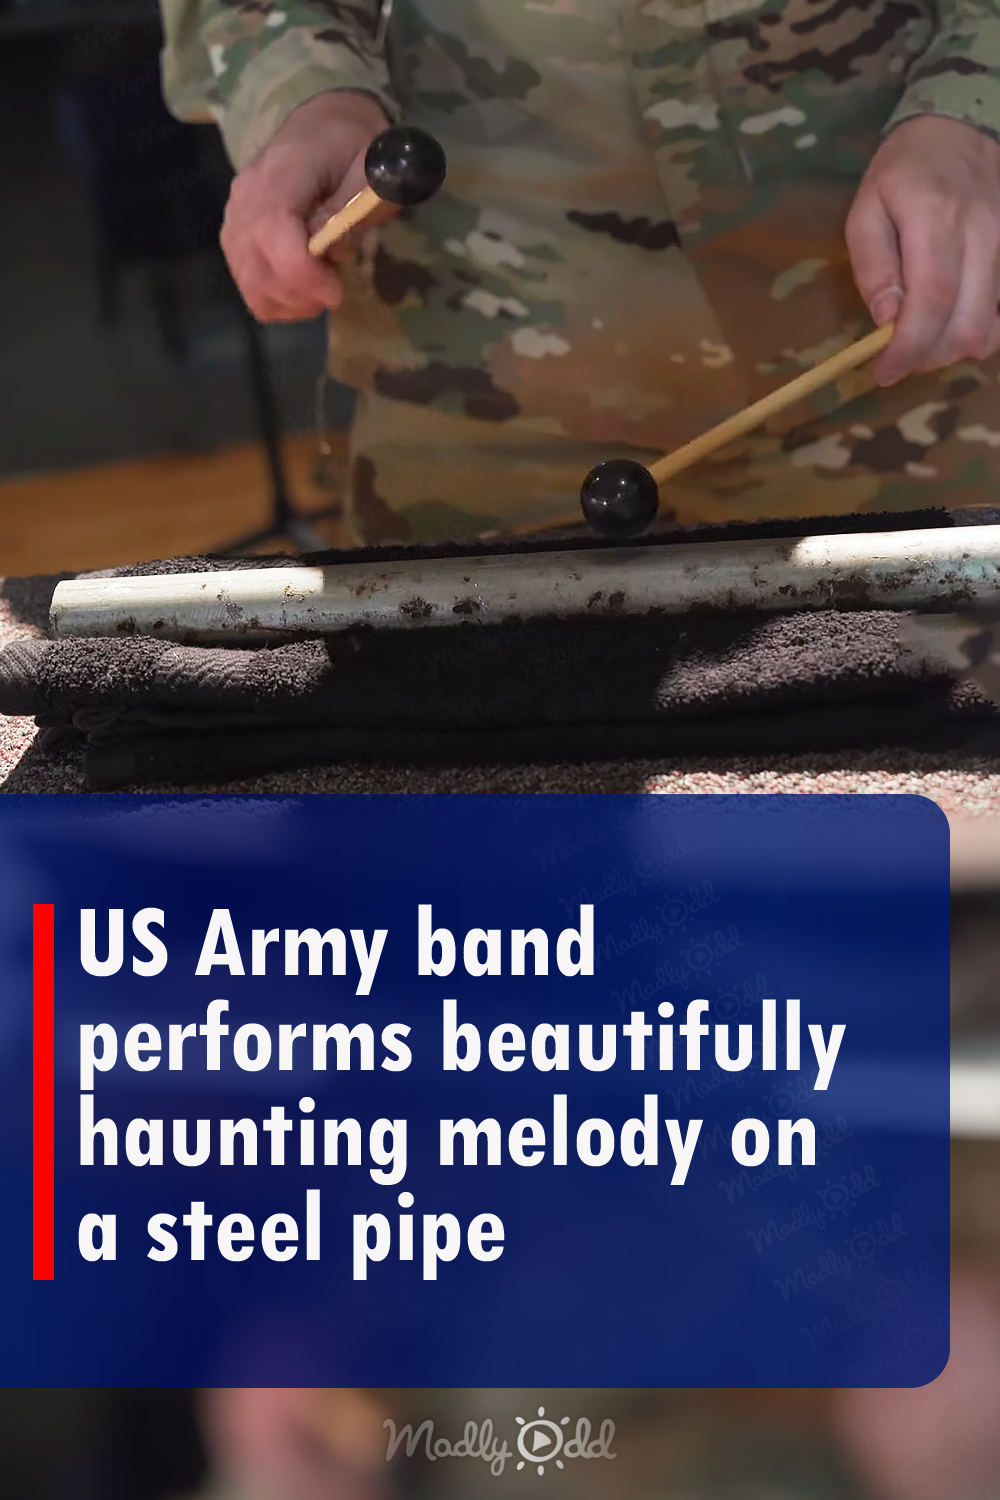 US Army band performs beautifully haunting melody on a steel pipe